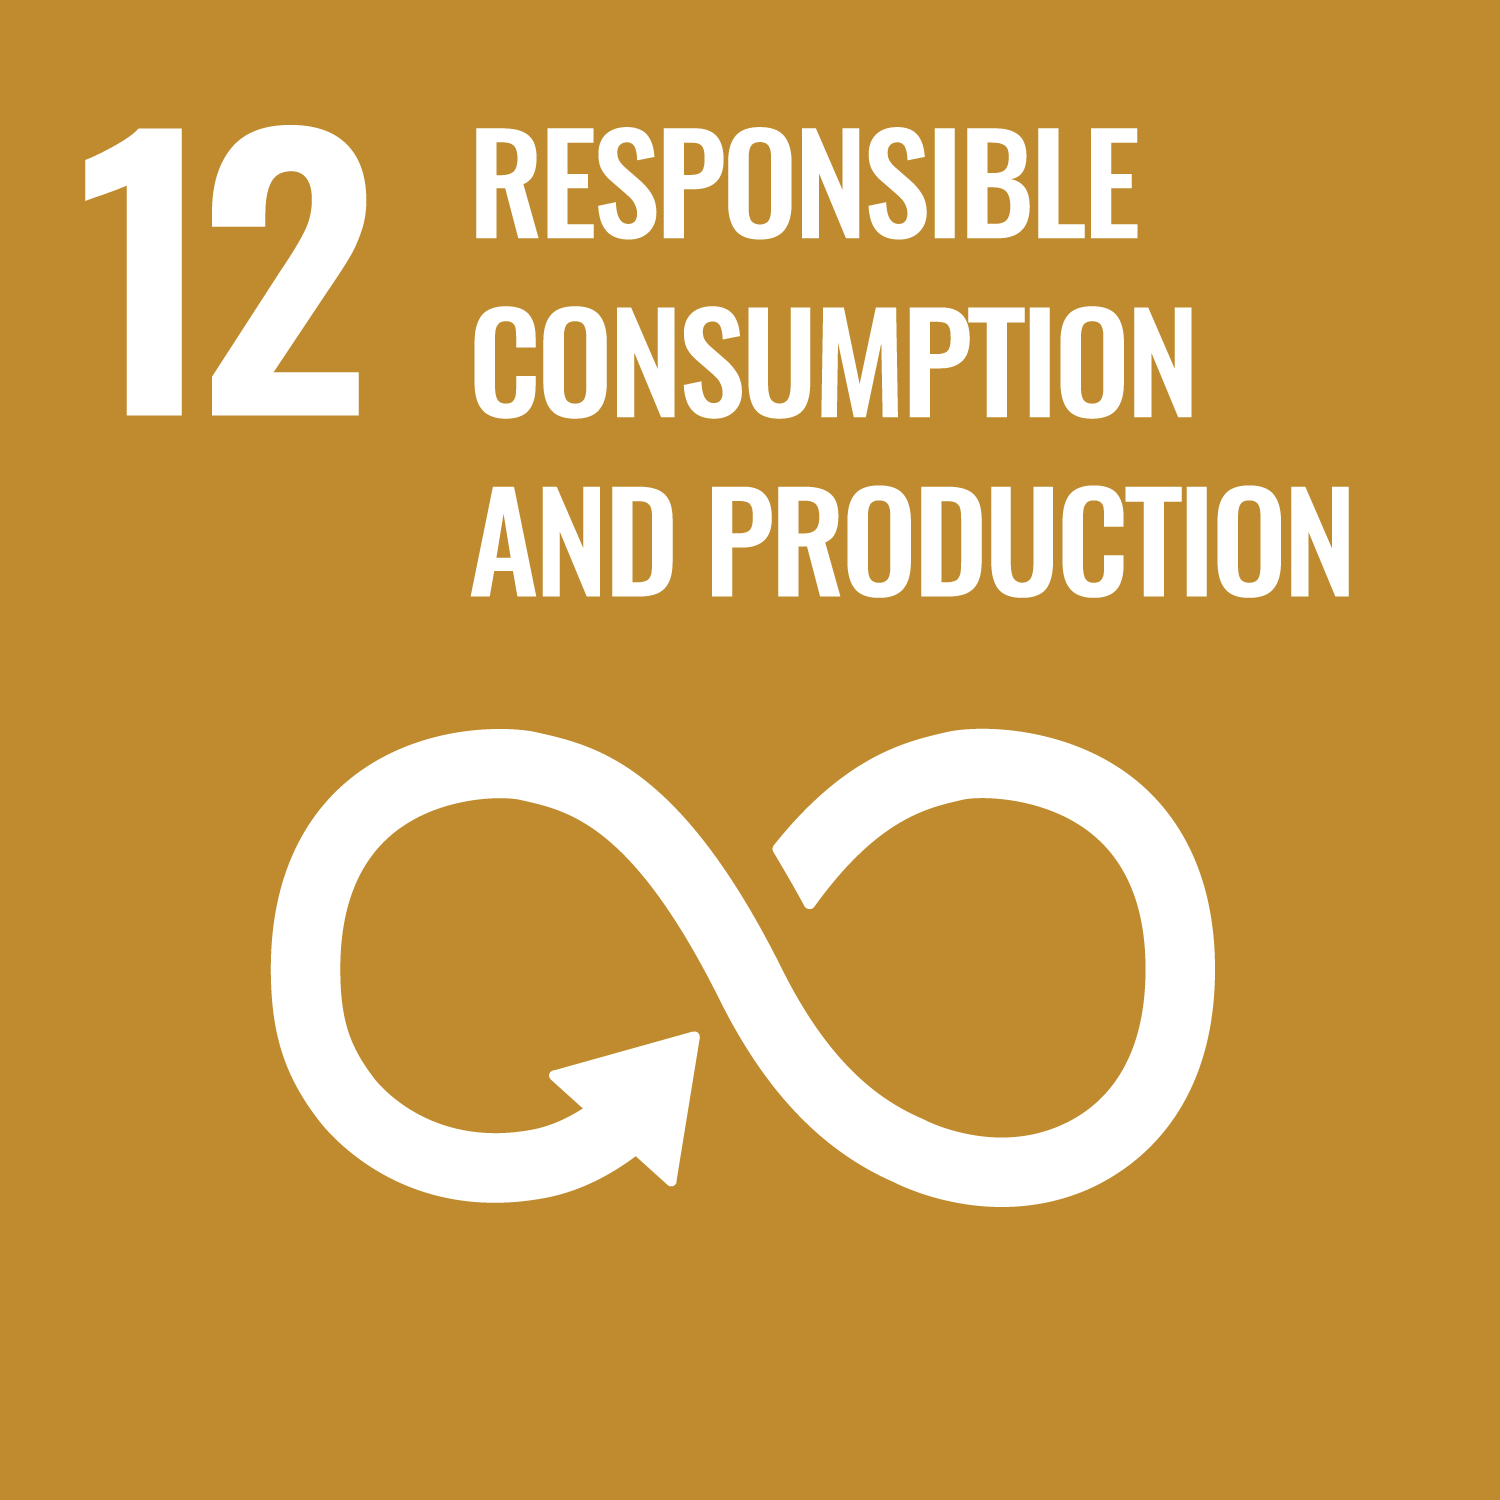 Sustainable Development Goal #12 (Responsible Consumption and Production)